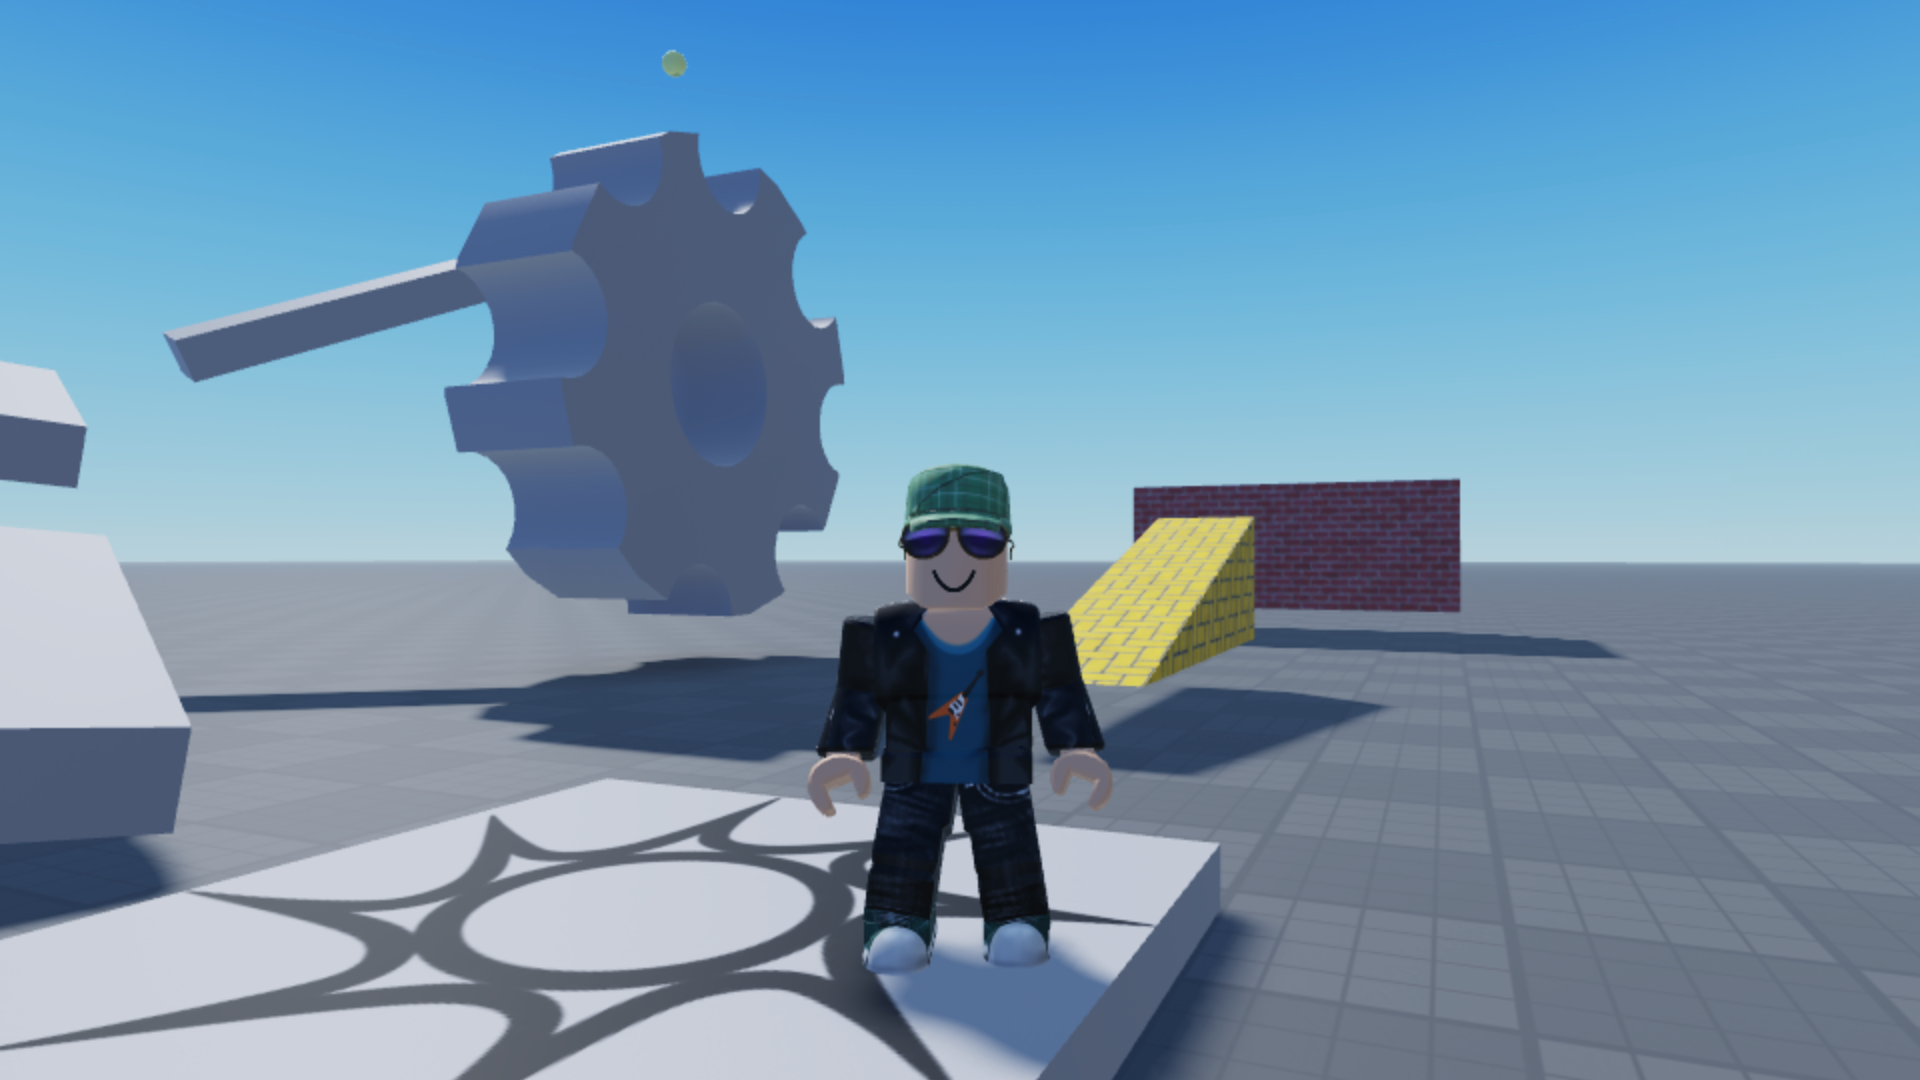 Creating my first experience in Roblox